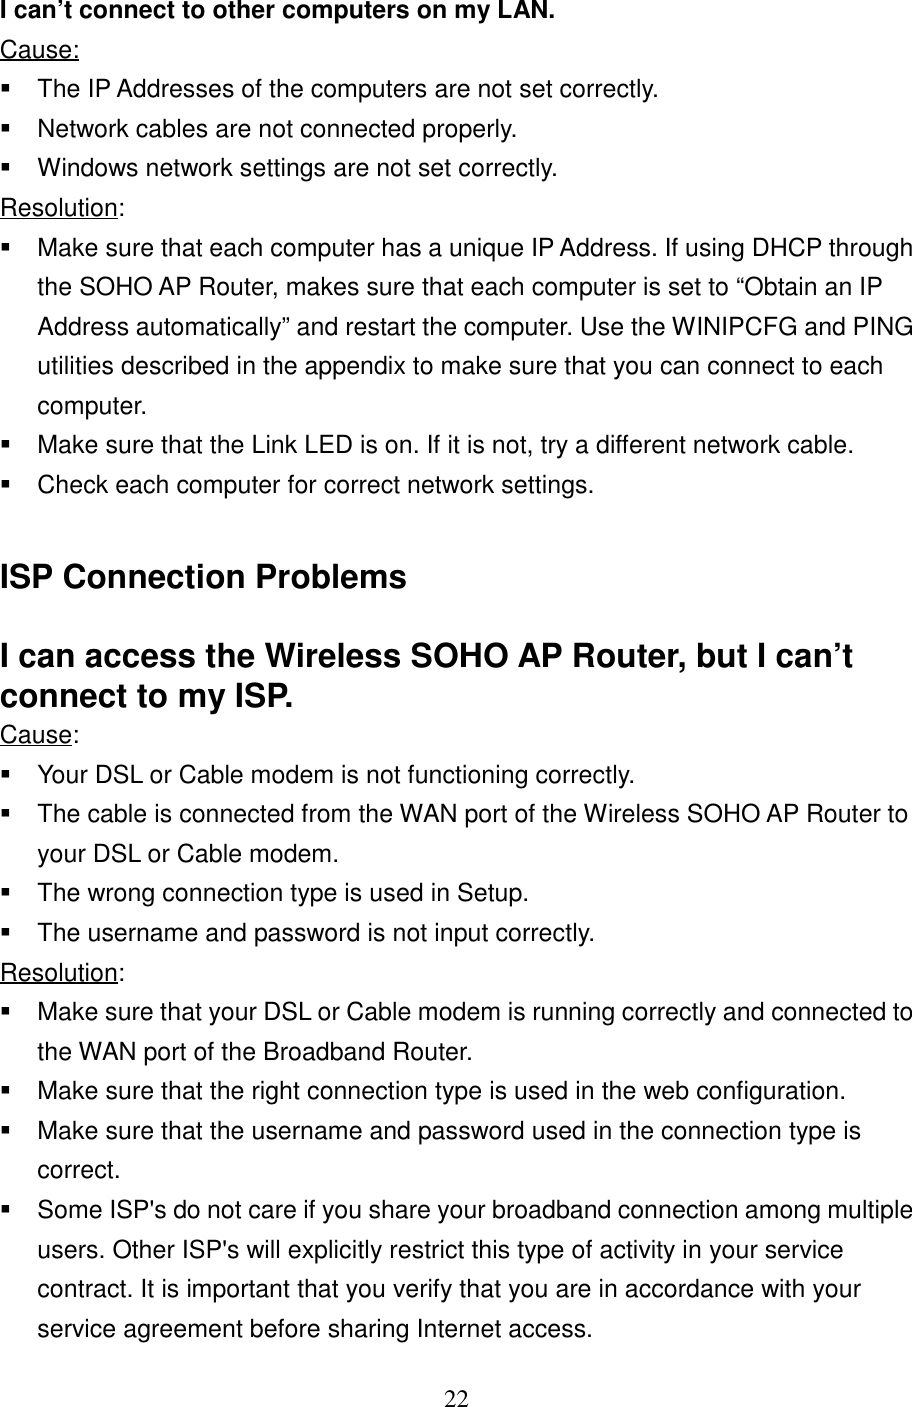 22I can’t connect to other computers on my LAN.Cause:  The IP Addresses of the computers are not set correctly.  Network cables are not connected properly.  Windows network settings are not set correctly.Resolution:  Make sure that each computer has a unique IP Address. If using DHCP throughthe SOHO AP Router, makes sure that each computer is set to “Obtain an IPAddress automatically” and restart the computer. Use the WINIPCFG and PINGutilities described in the appendix to make sure that you can connect to eachcomputer.  Make sure that the Link LED is on. If it is not, try a different network cable.  Check each computer for correct network settings.ISP Connection ProblemsI can access the Wireless SOHO AP Router, but I can’tconnect to my ISP.Cause:  Your DSL or Cable modem is not functioning correctly.  The cable is connected from the WAN port of the Wireless SOHO AP Router toyour DSL or Cable modem.  The wrong connection type is used in Setup.  The username and password is not input correctly.Resolution:  Make sure that your DSL or Cable modem is running correctly and connected tothe WAN port of the Broadband Router.  Make sure that the right connection type is used in the web configuration.  Make sure that the username and password used in the connection type iscorrect.  Some ISP&apos;s do not care if you share your broadband connection among multipleusers. Other ISP&apos;s will explicitly restrict this type of activity in your servicecontract. It is important that you verify that you are in accordance with yourservice agreement before sharing Internet access.